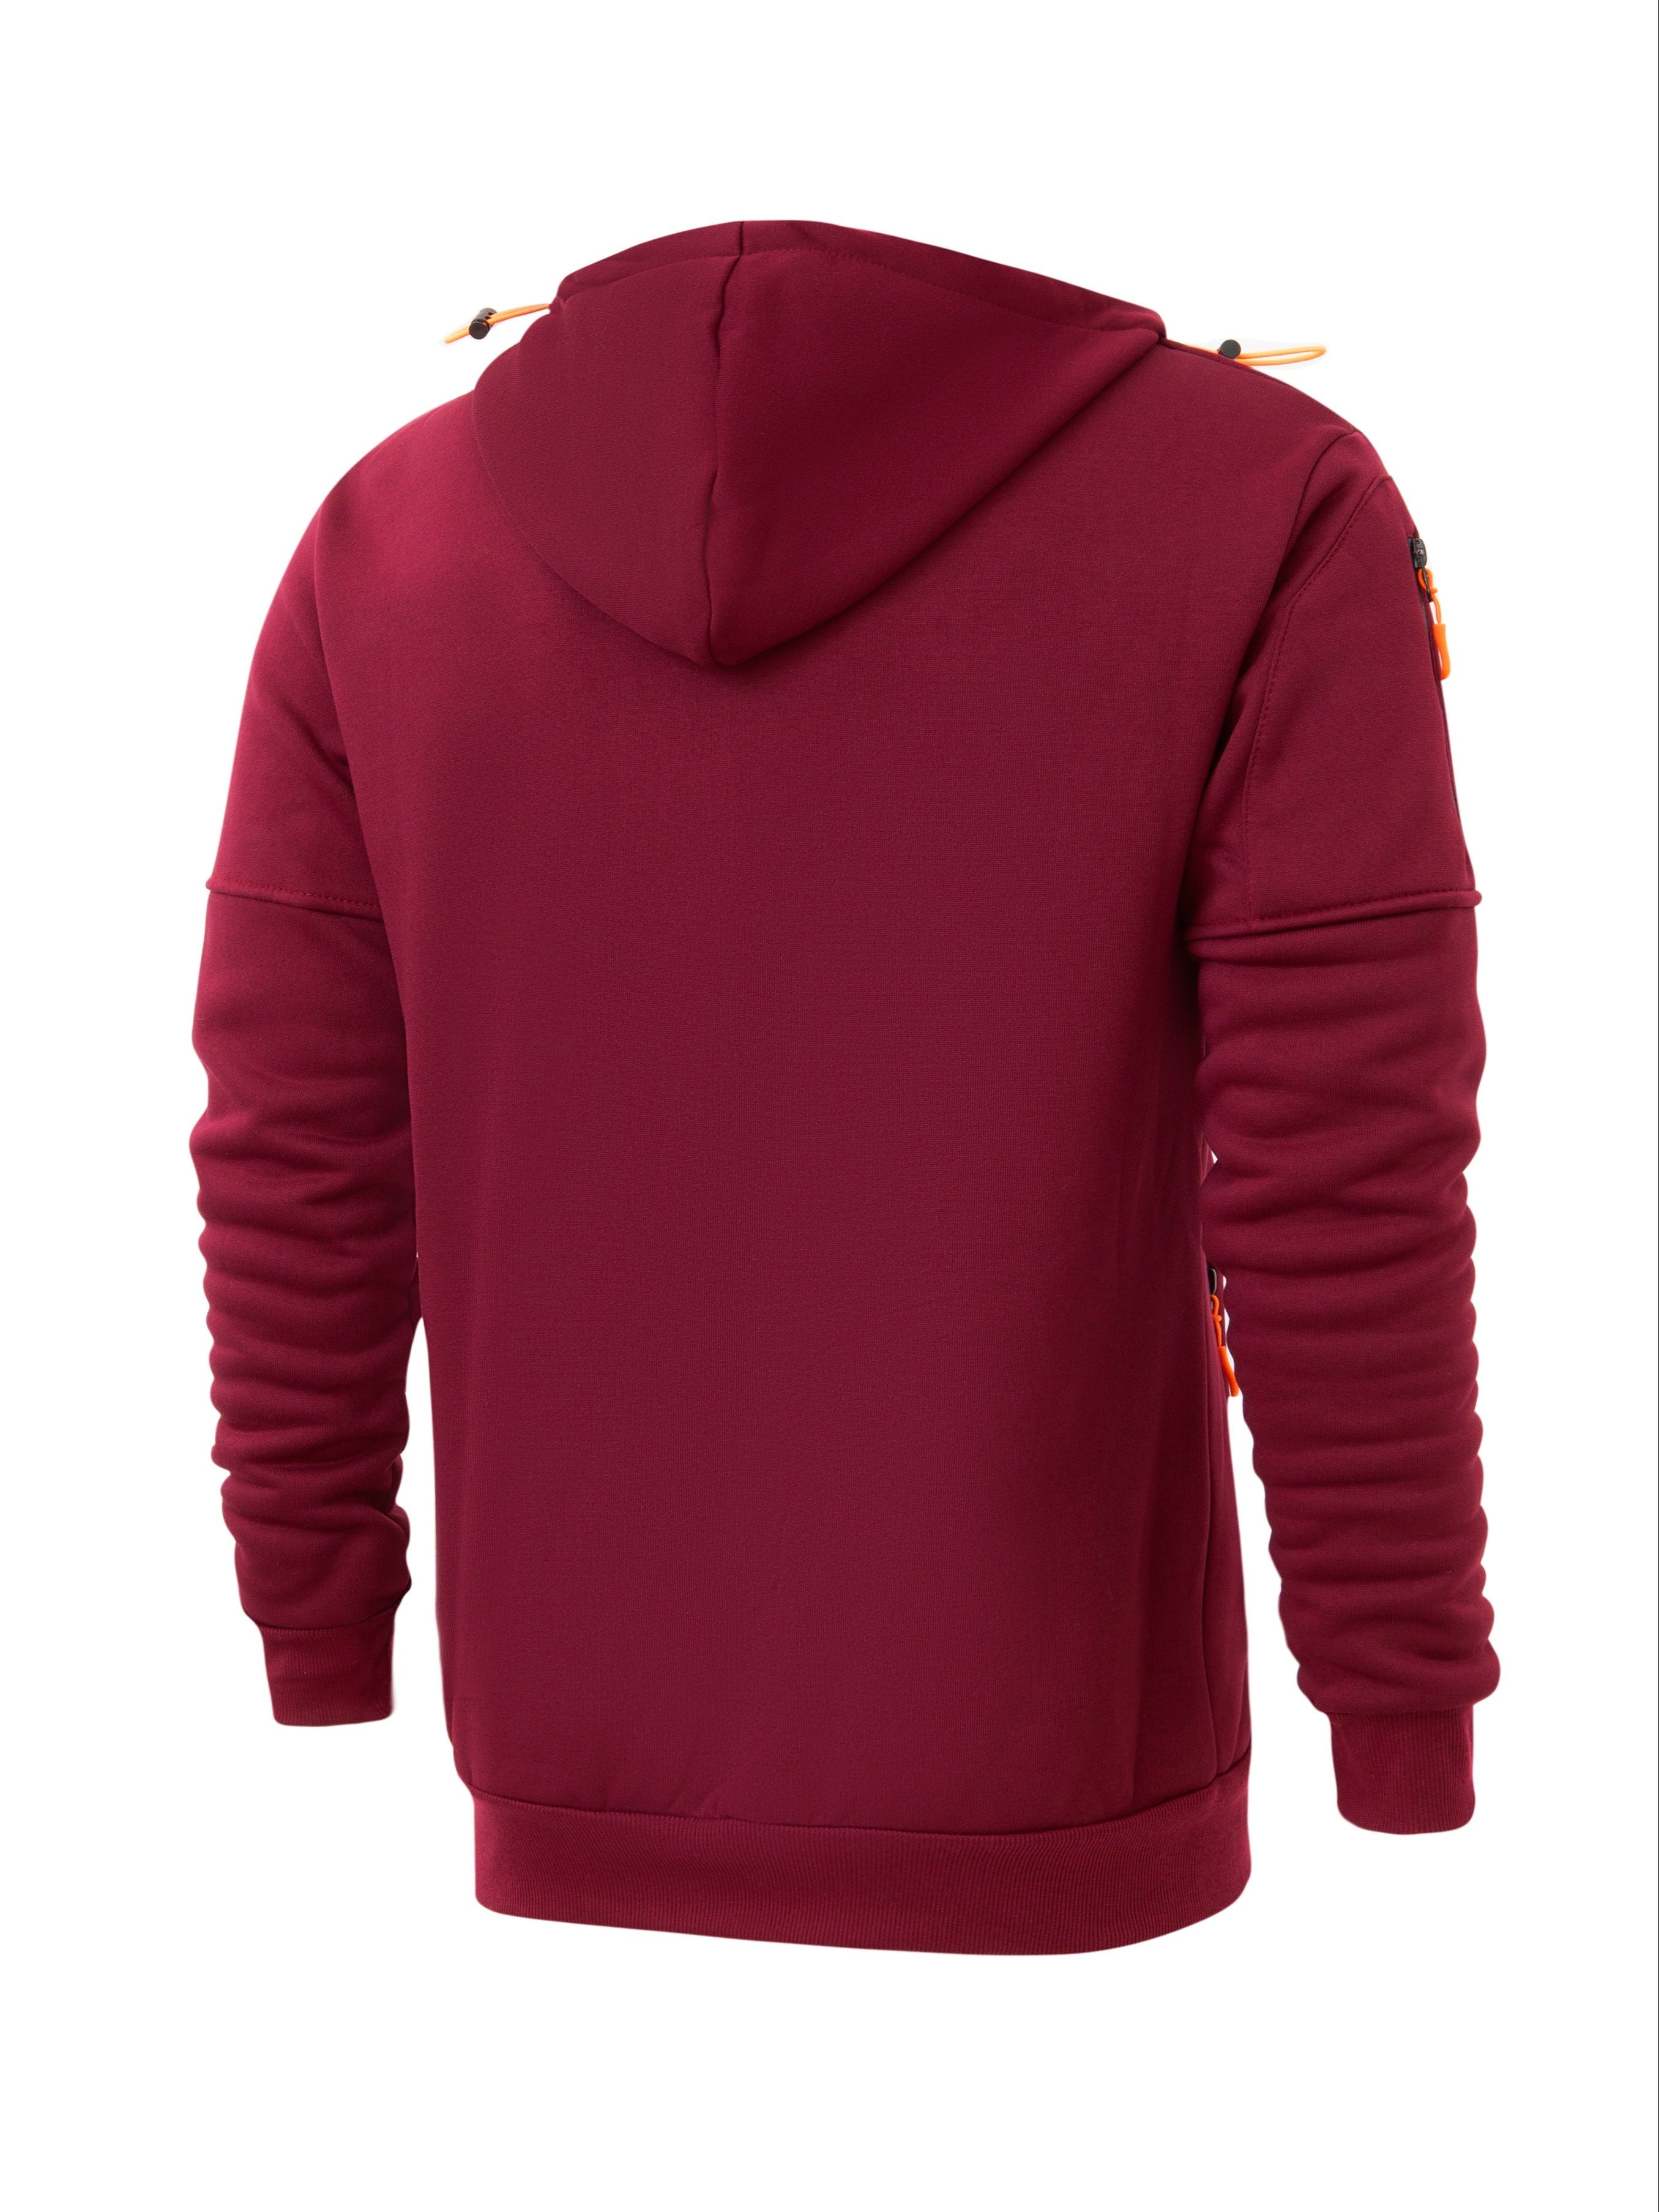 solid color mens hooded jacket casual long sleeve hoodies with zipper gym sports hooded coat for spring fall details 6